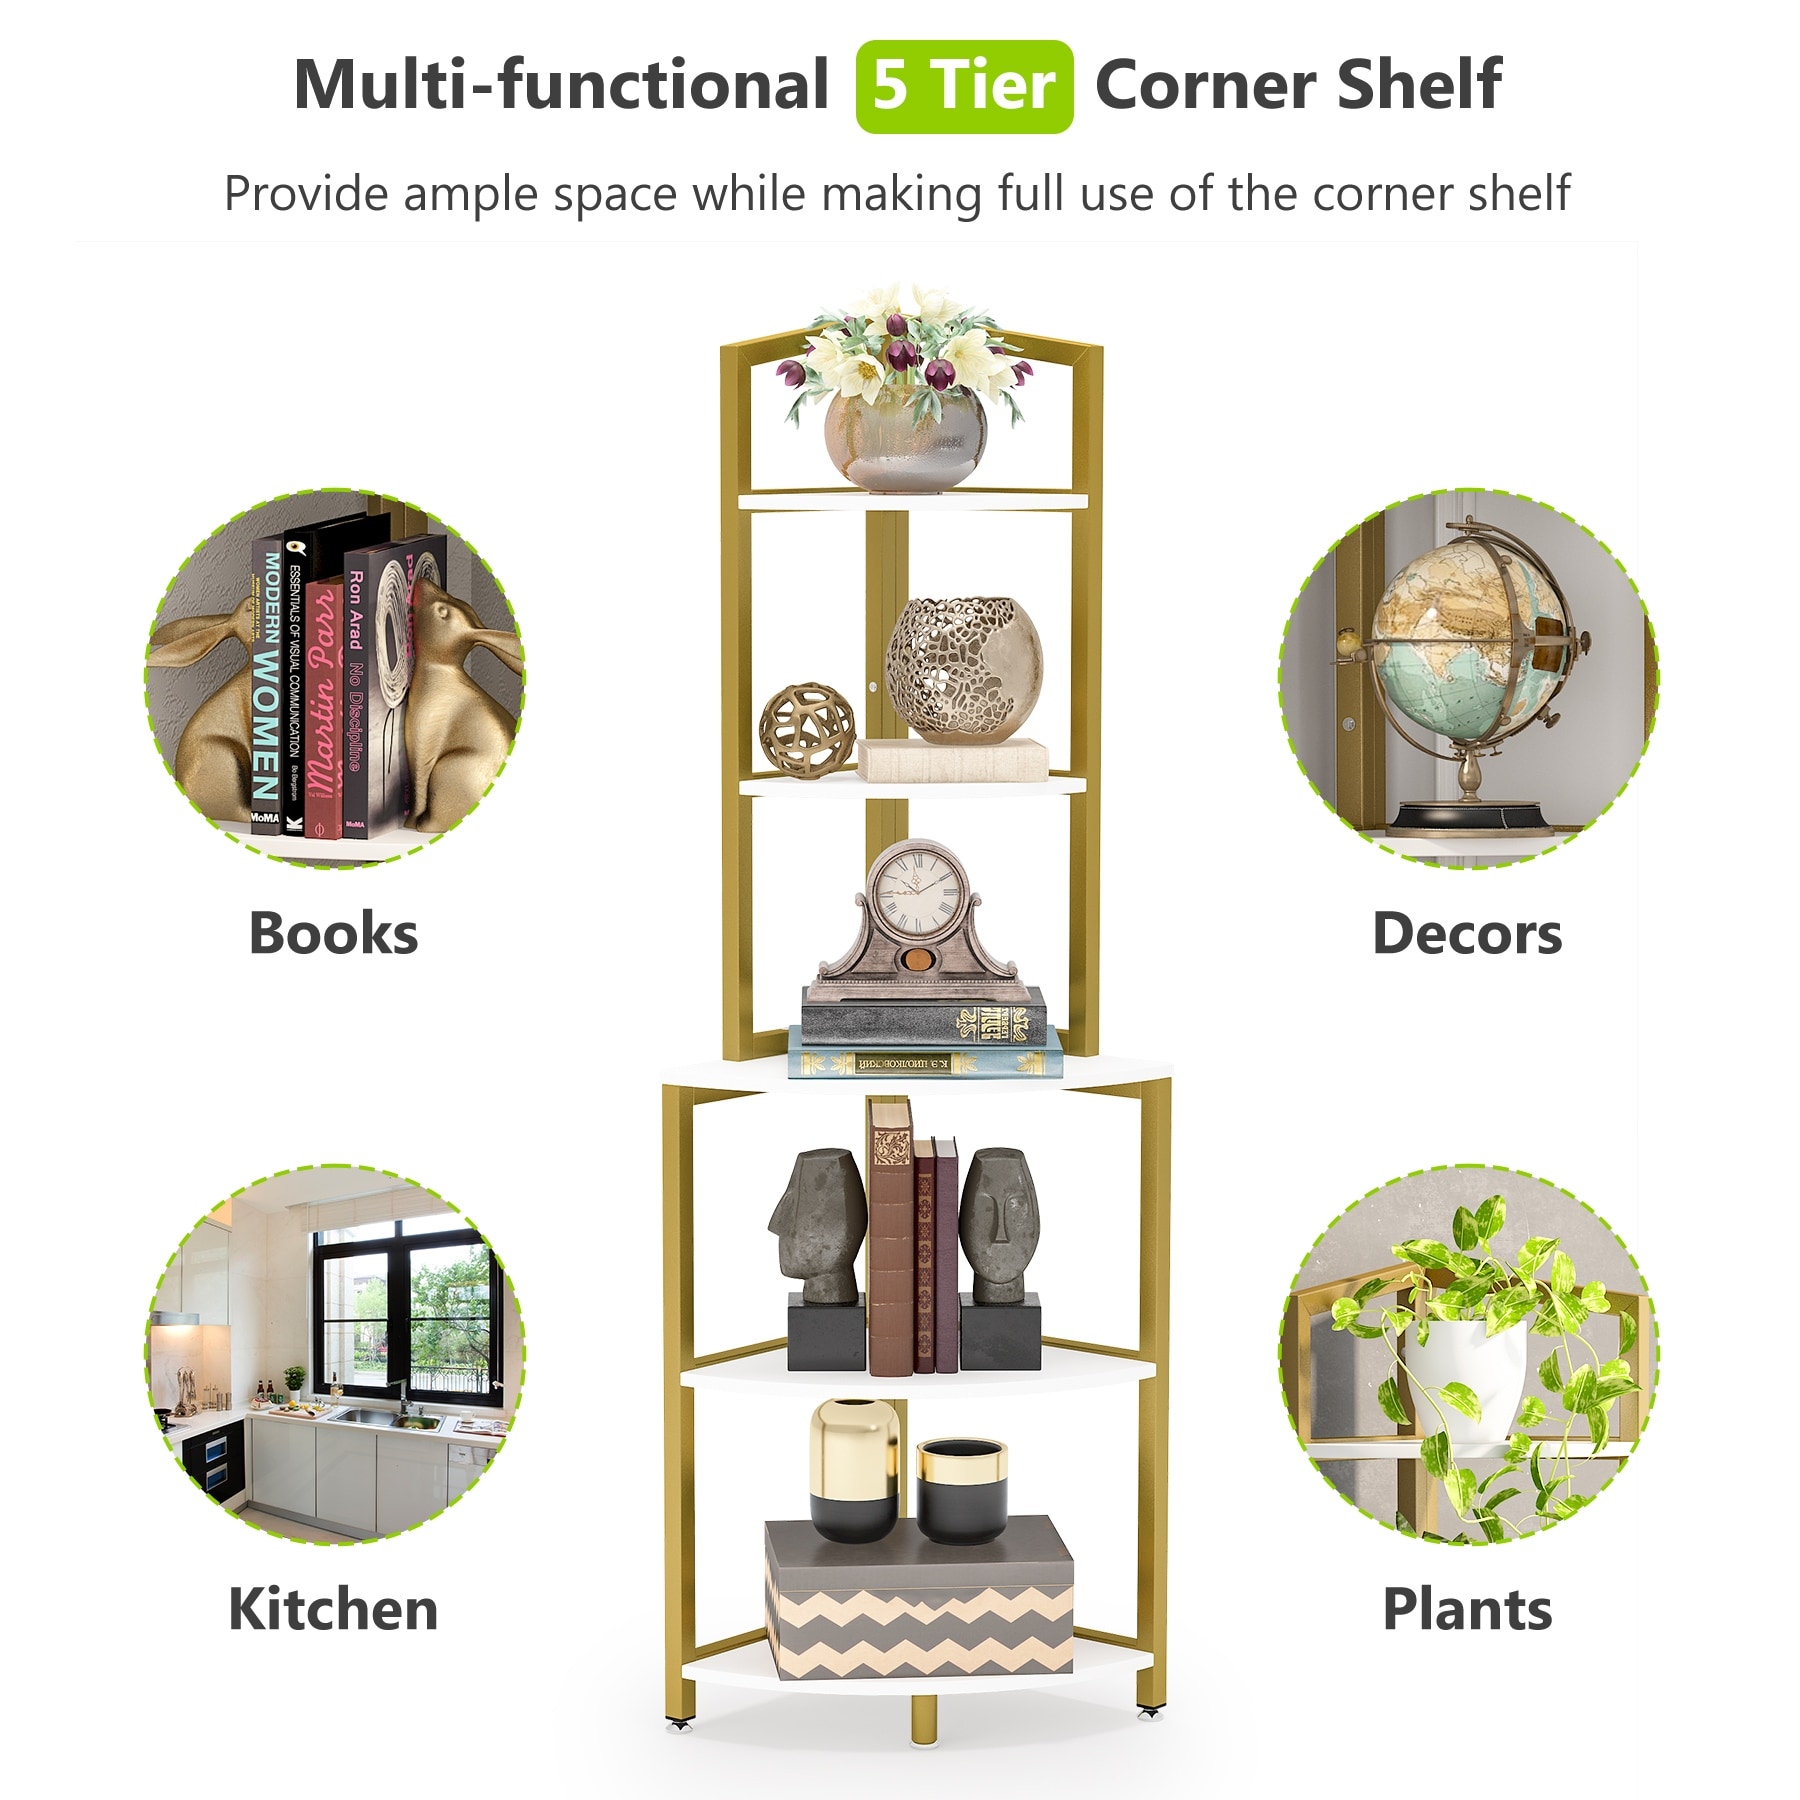 https://ak1.ostkcdn.com/images/products/is/images/direct/5bdbe0333f90cabd5f414c4dabfa1190f7e16fad/5-Tier-Corner-Shelf%2C-60-Inch-Bookcase-for-Living-Room%2C-Industrial-Corner-Storage-Rack-Plant-Stand-for-Home-Office.jpg